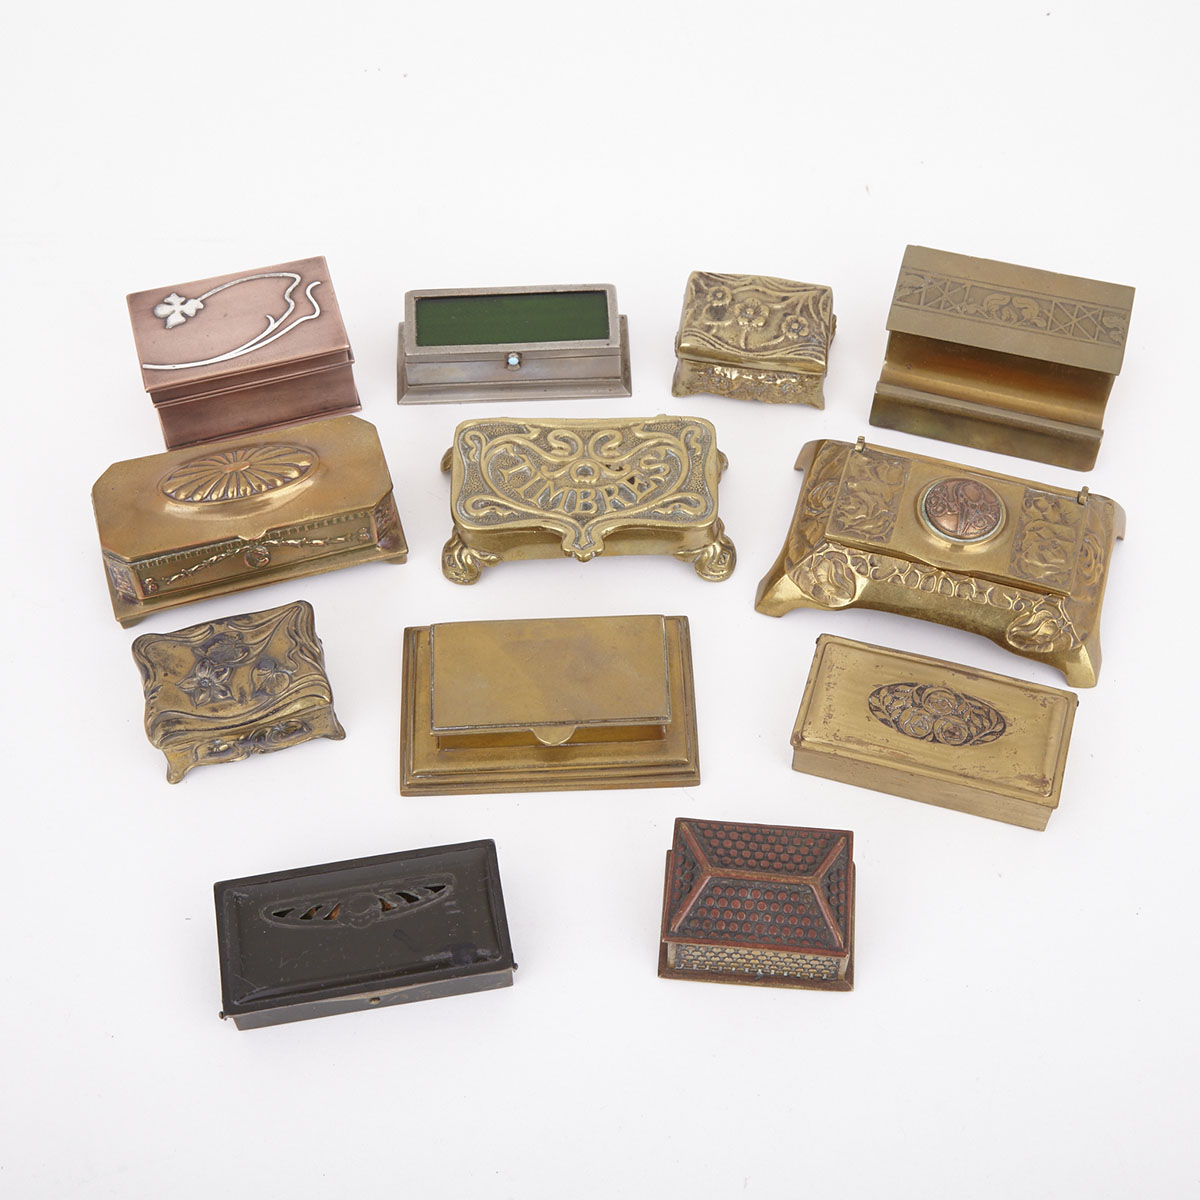 Collection of 12 Mostly Art Nouveau Metal Stamp Boxes, 19th/early 20th century